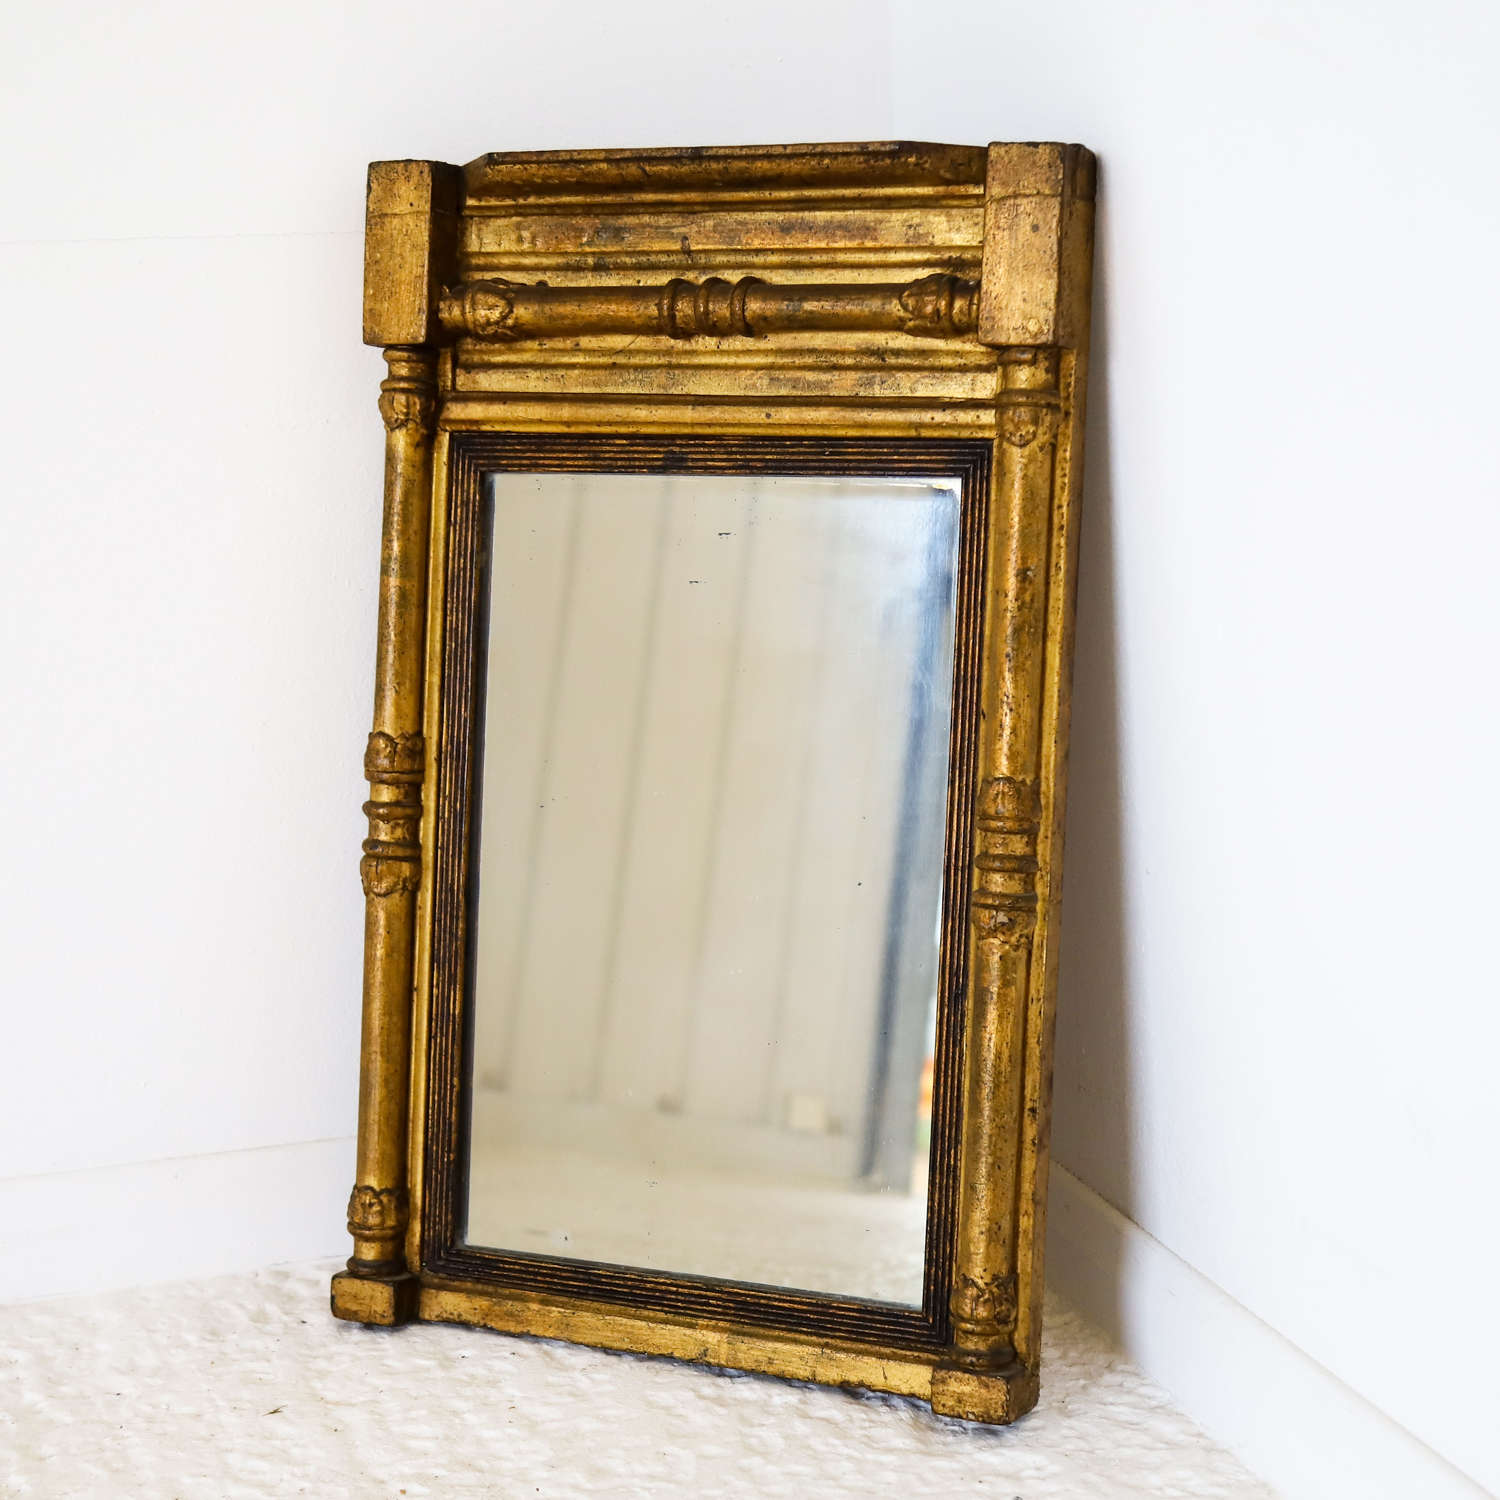 Antique Decorative Gilt Mirror Frame glass flanked by columns